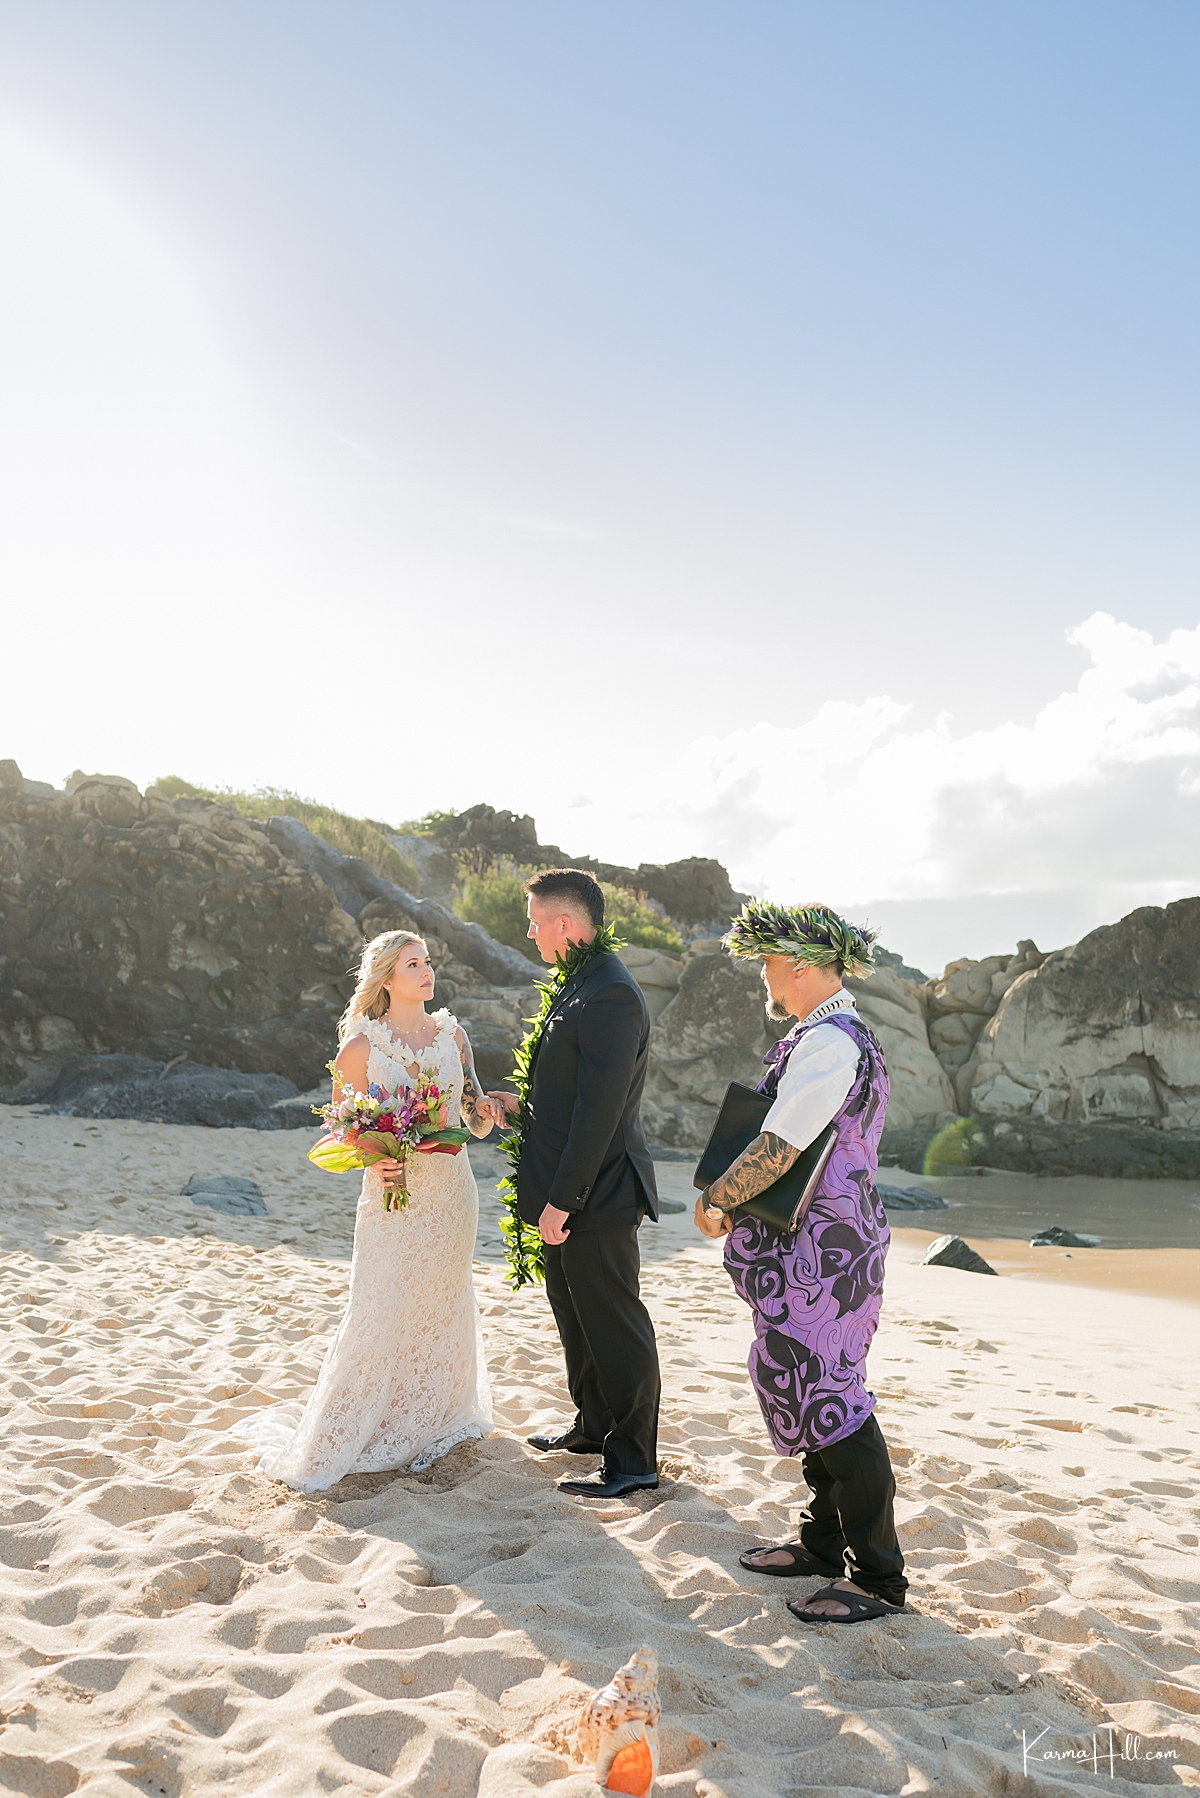 real vow exchange during a beach wedding in hawaii 